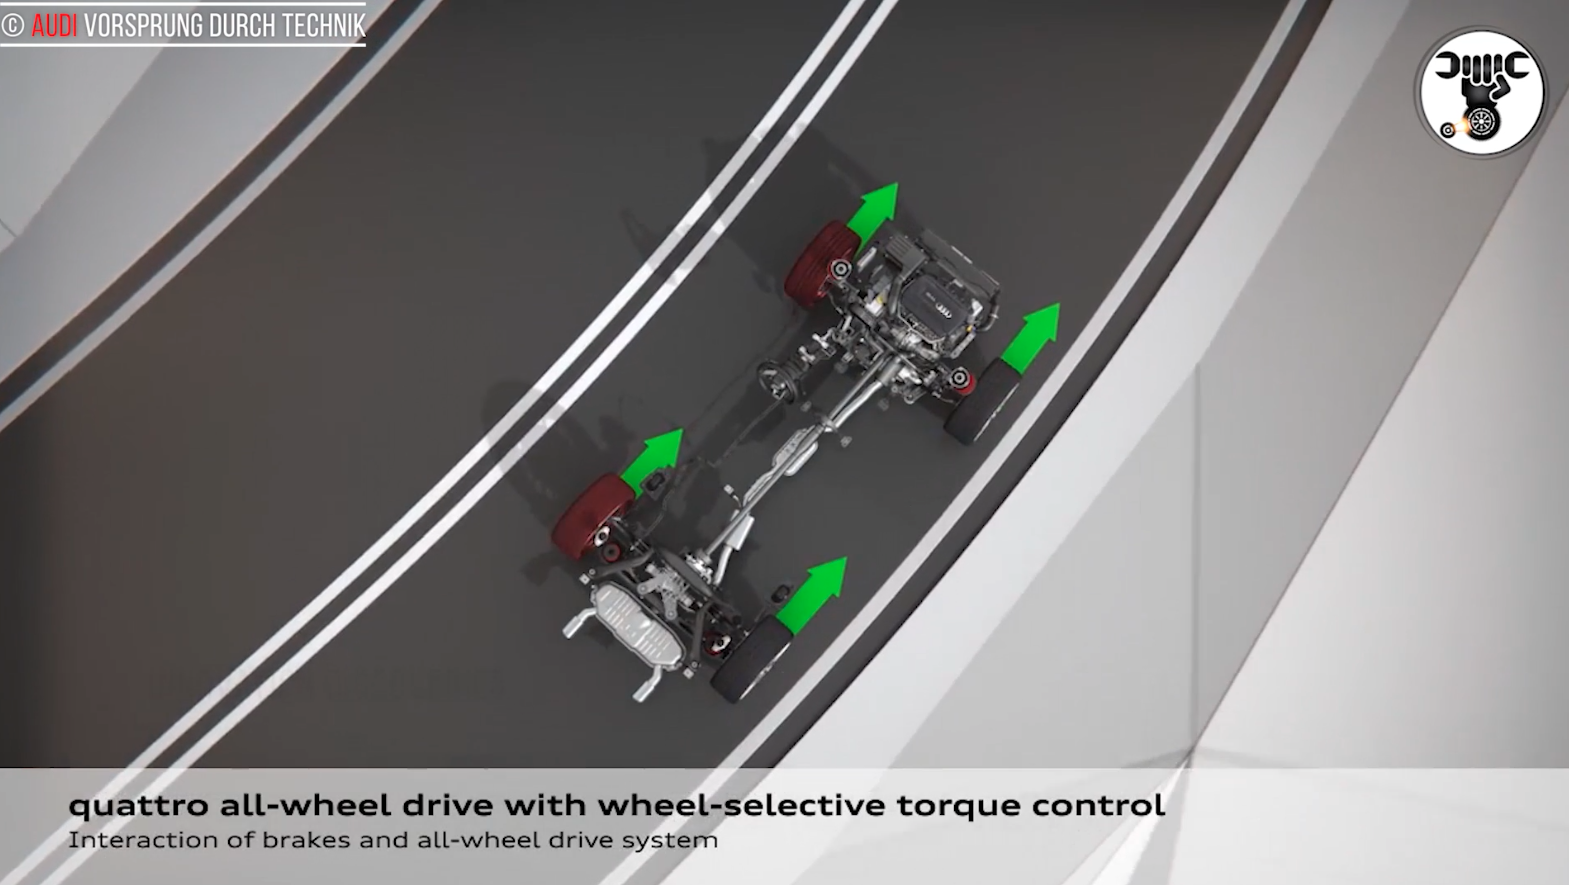 Electronically controlled multi-plate clutch in TT